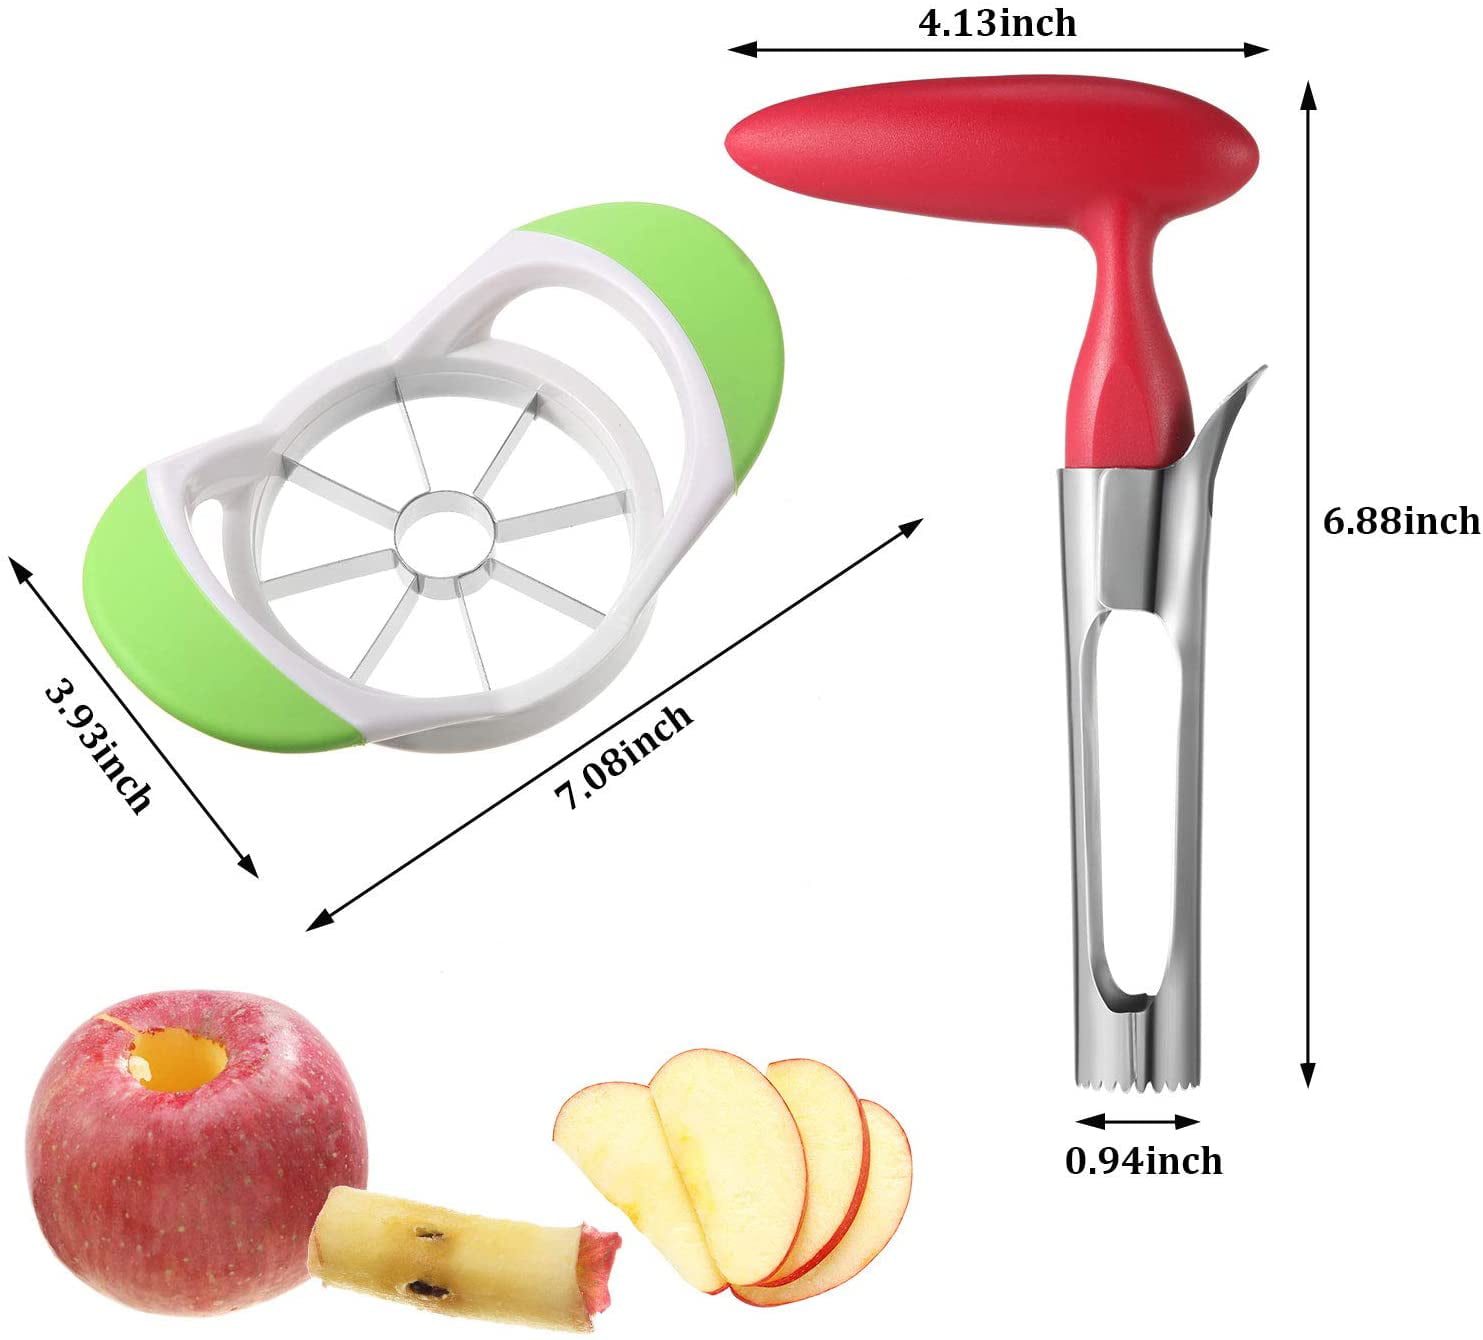 Stainless steel apple corer *** Set of 2 pieces *** 